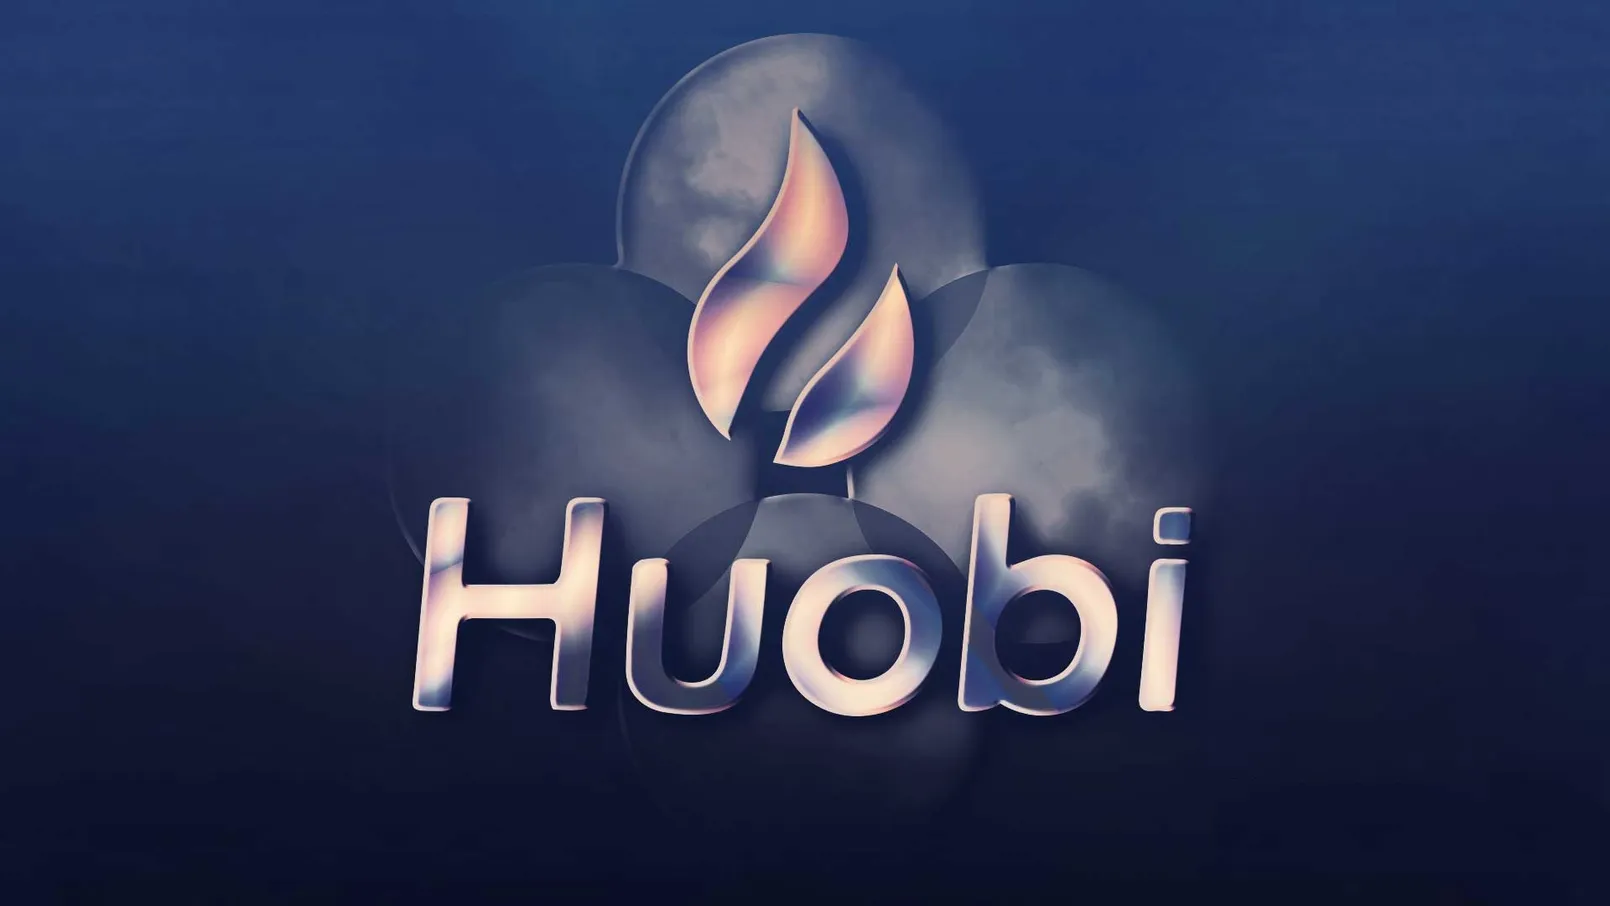 Huobi on Fire Successful First Ieo Xrp Contracts and Dedicated Team to Serve Institutions 3a7decce1ca0323121e5debcf25a0ddc.jpeg